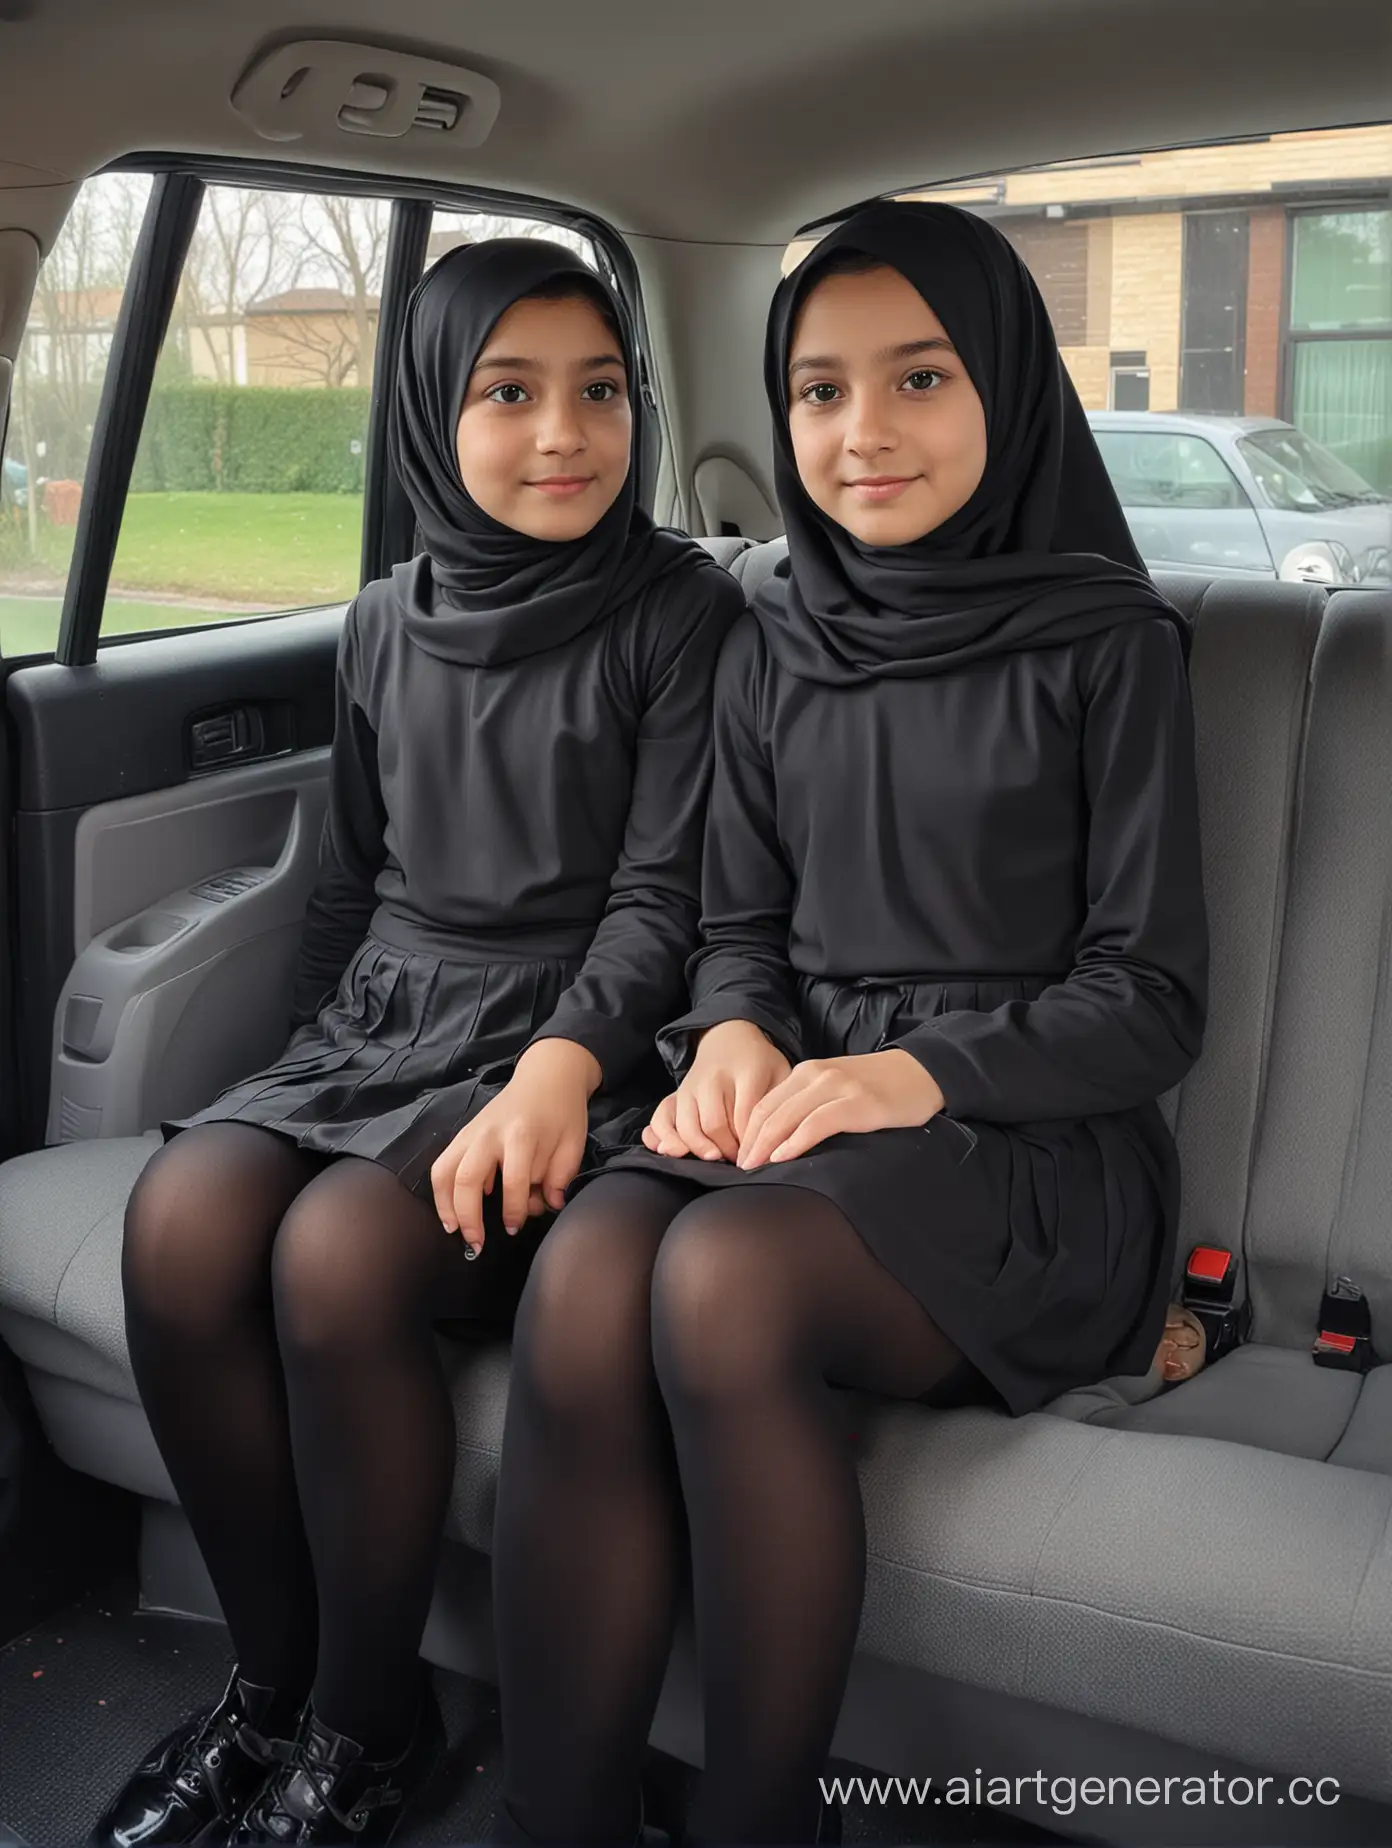 Two-Young-Girls-in-Hijabs-Sitting-in-Car-Seats